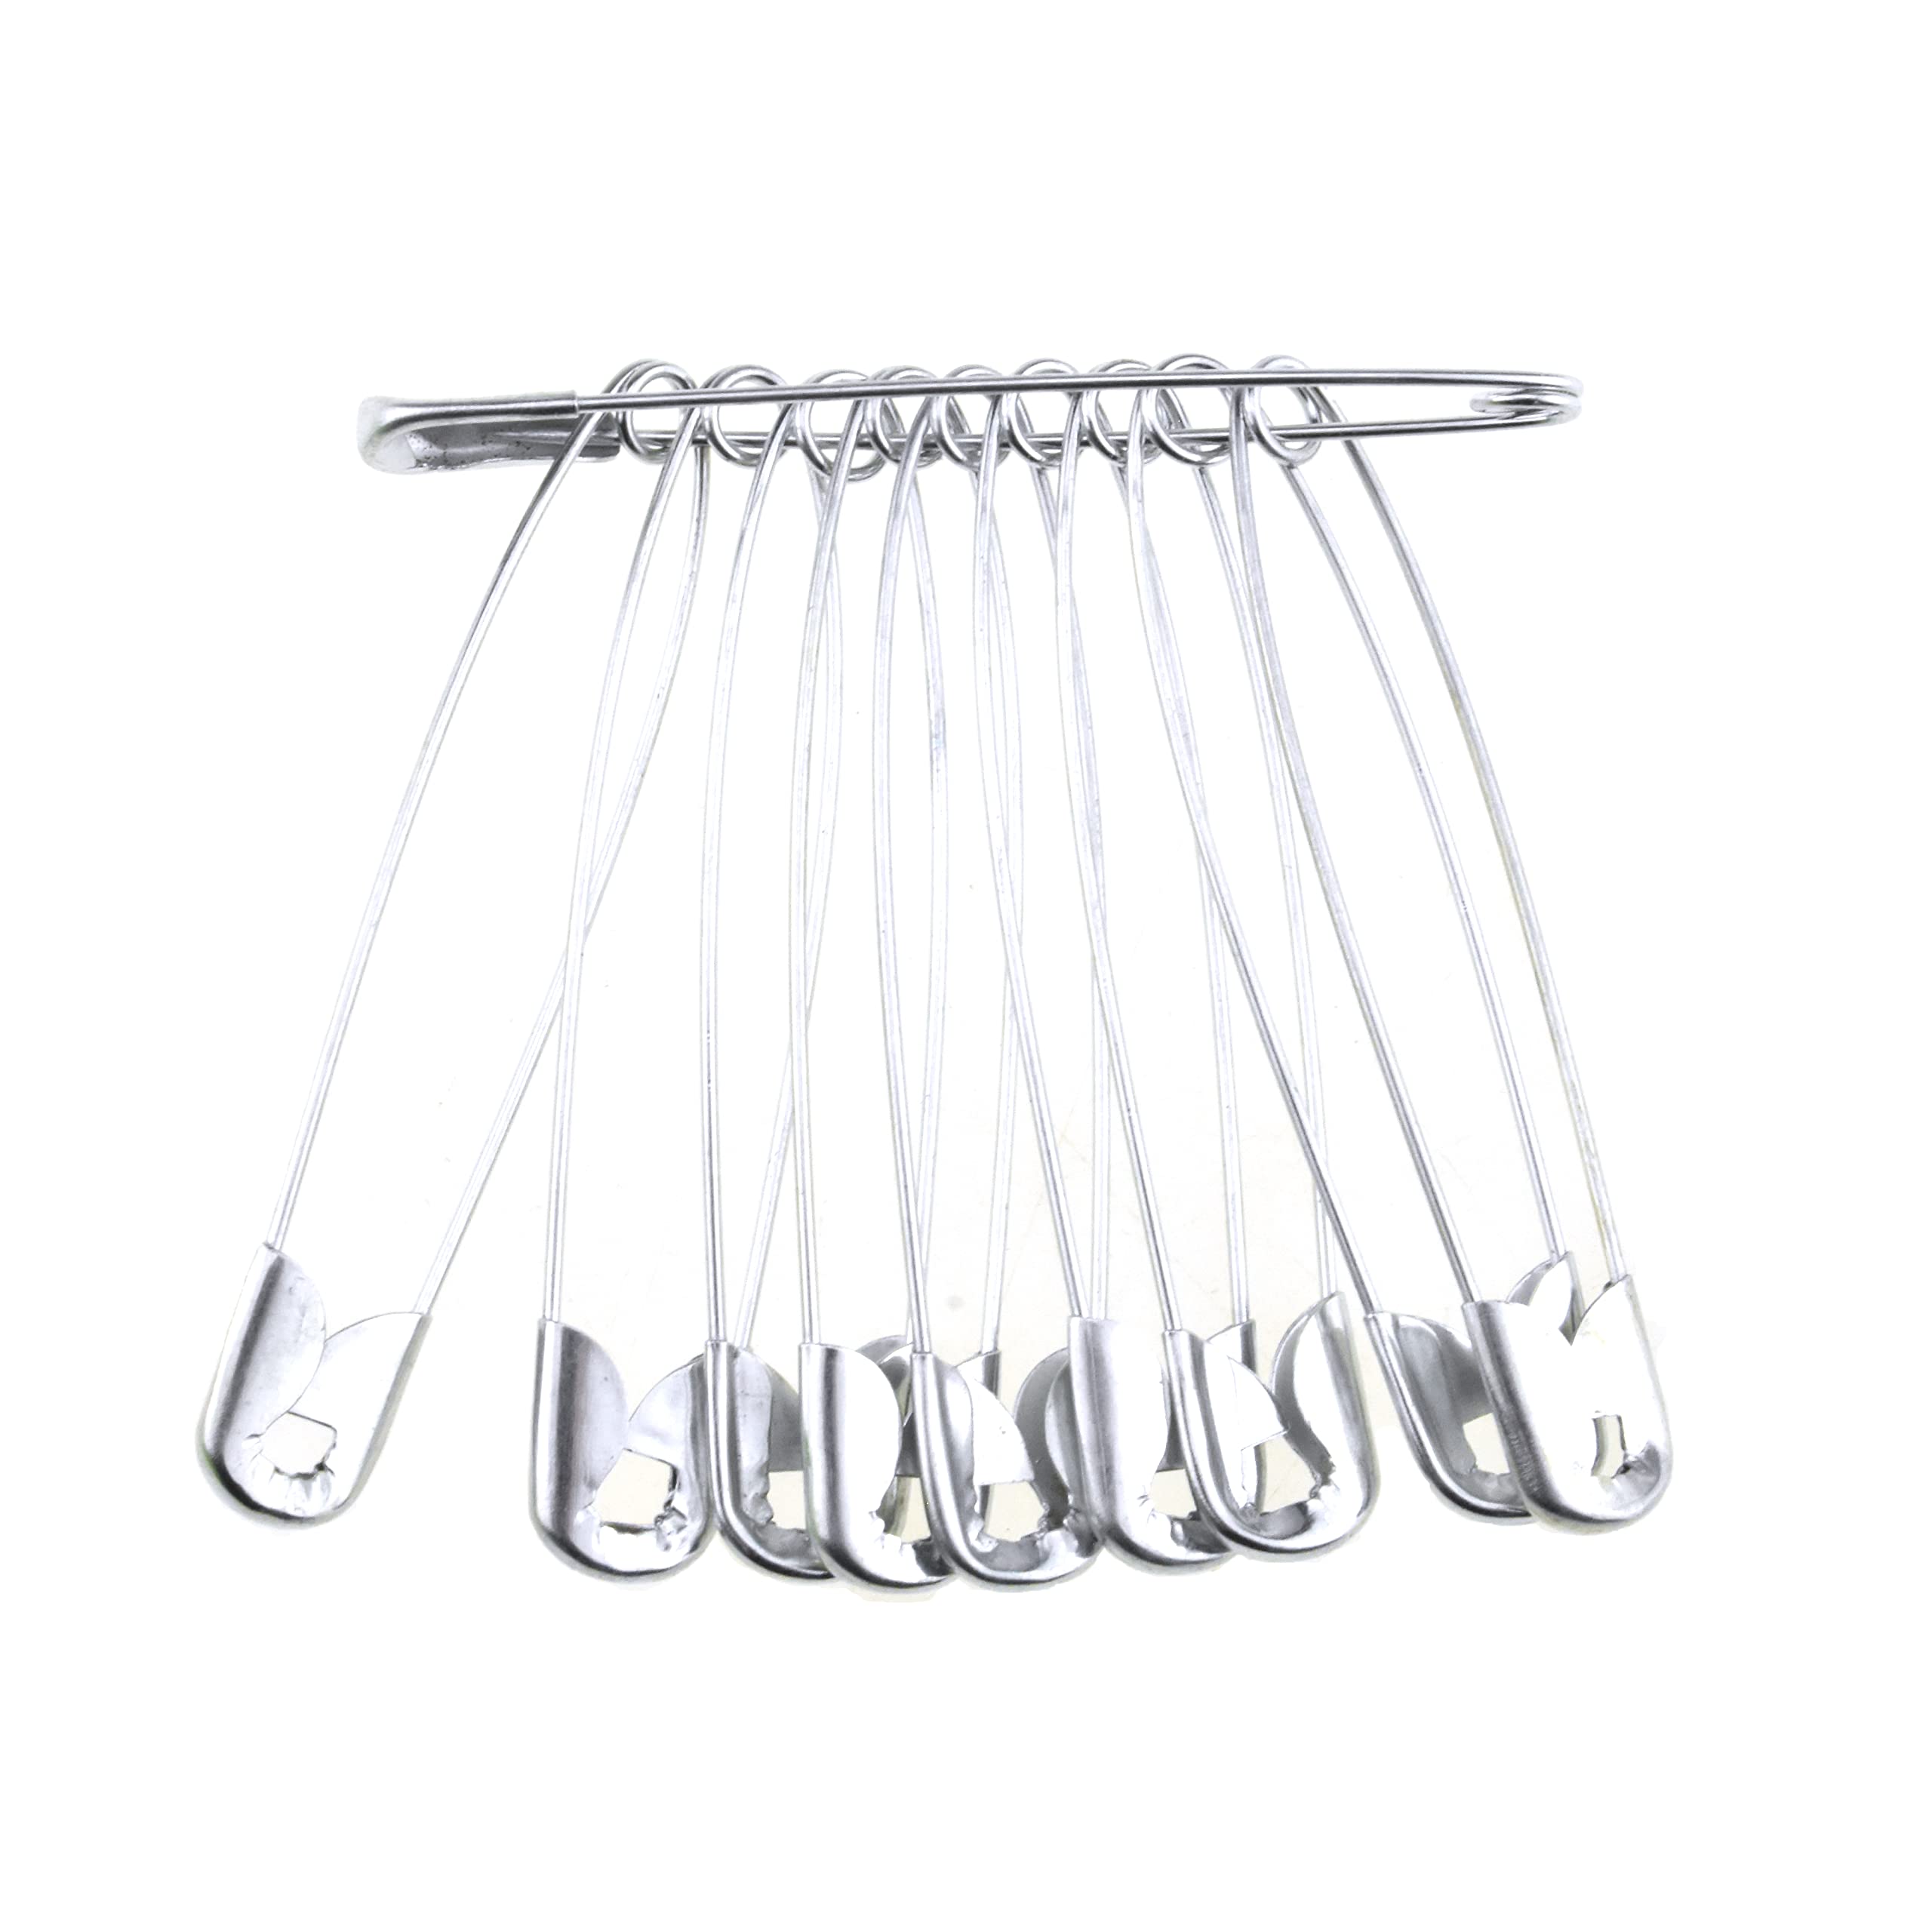 SPHTOEO 50PCS Cloth Diaper Pins Stainless Steel Traditional Safety Pin